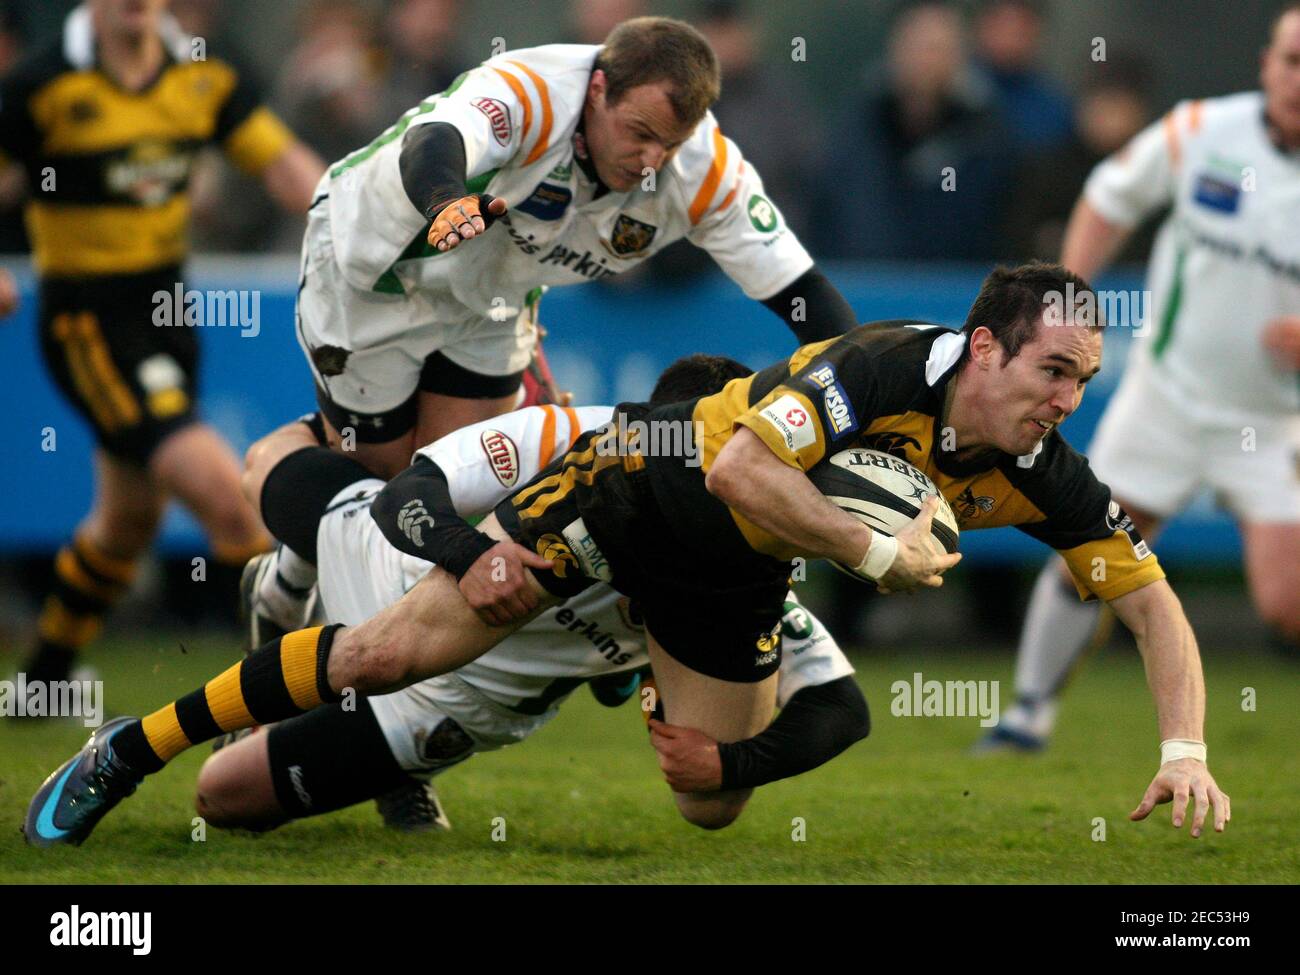 Rugby Union - London Wasps contro Northampton Saints Guinness A League Final First leg - Dry Leas, Henley RFC - 21/4/08 David Doherty of Wasps in azione Mandatory Credit: Action Images / Scott Heavey Livepic Foto Stock